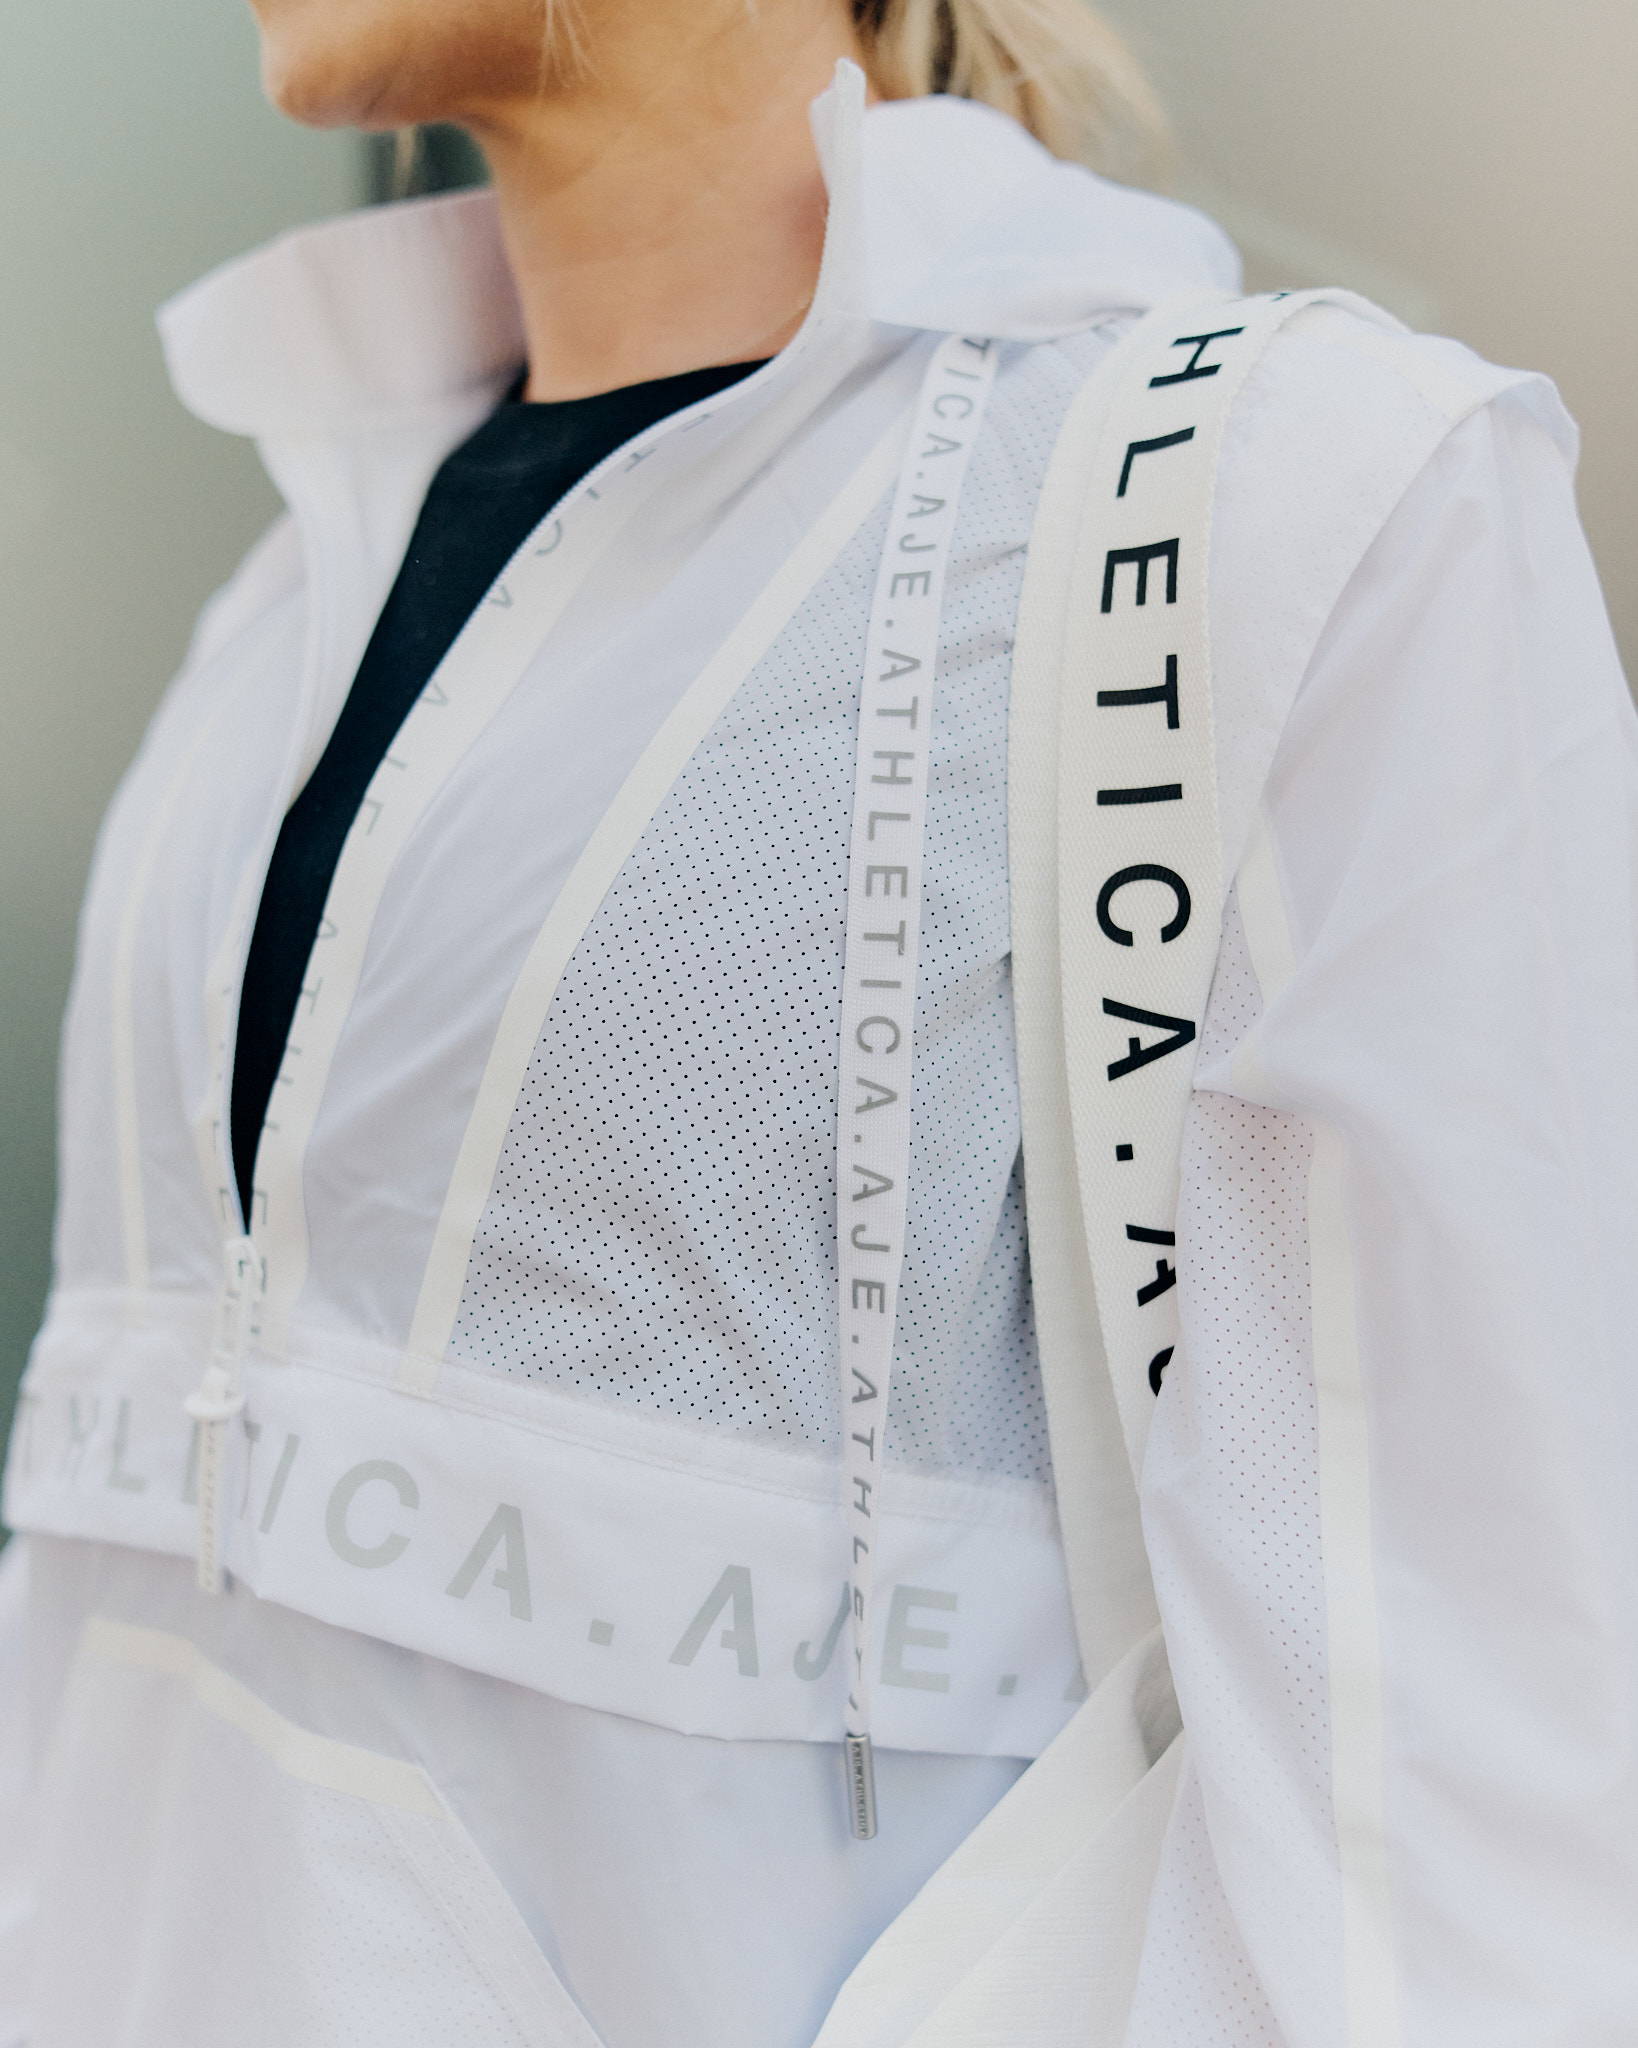 Aje Athletica firms place in athleisure space with second launch